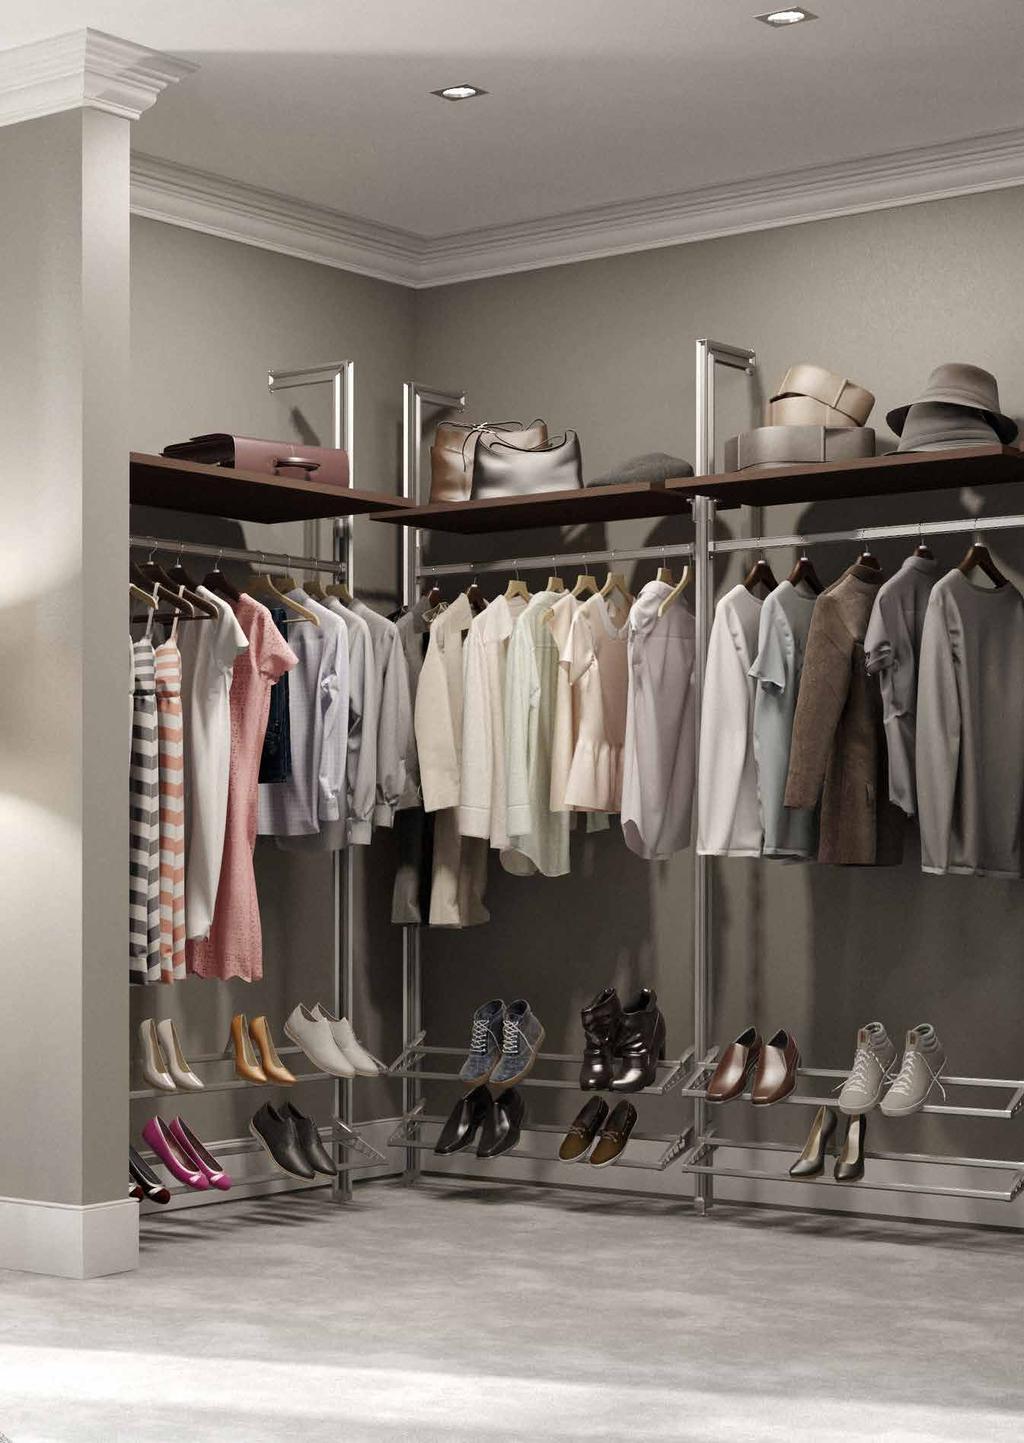 Modular STORAGE / INTERIOR Don t be restricted by fixed wardrobe interiors that can t adapt to your lifestyle.